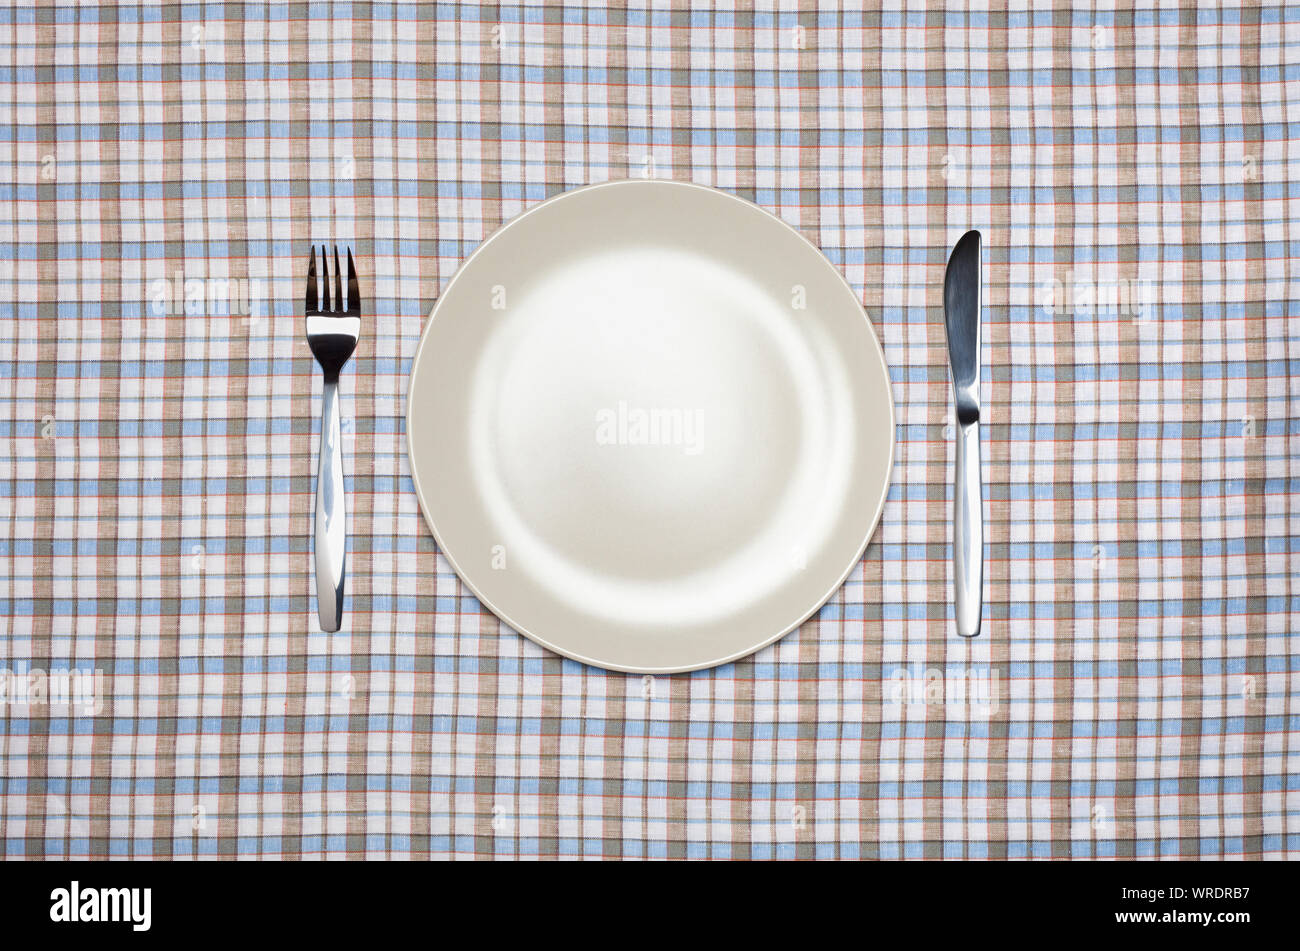 Place setting, white plate, knife and fork, from above on a pastel check tablecloth Stock Photo